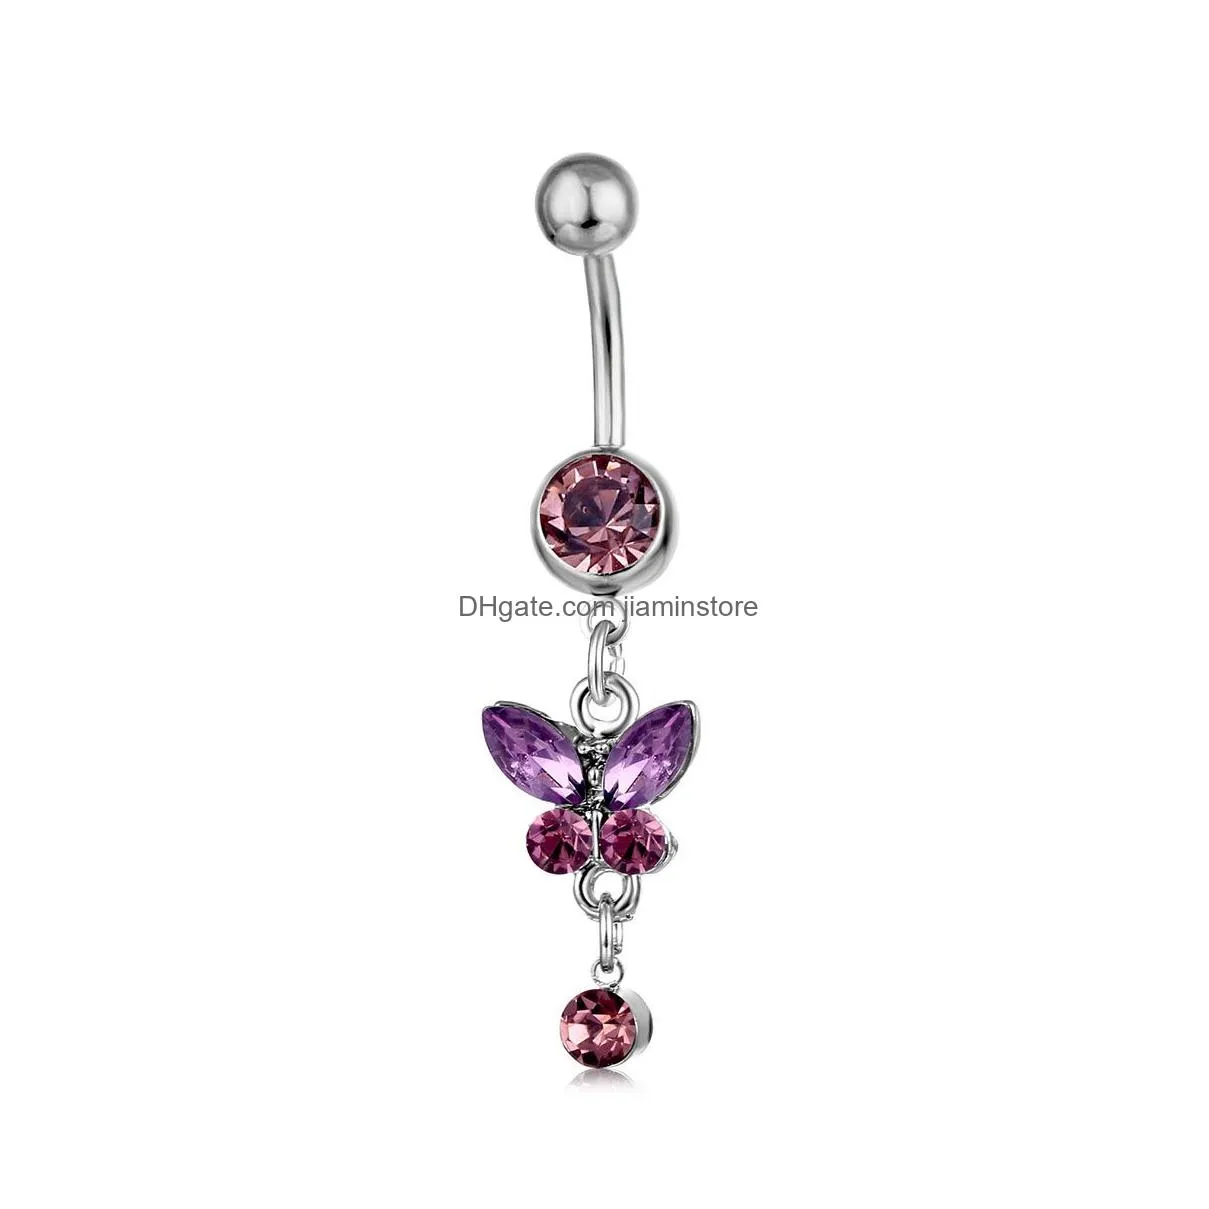 YYJFF D0347 ( 7 colors ) mix Belly Button Ring Navel Rings Body Piercing Jewelry Dangle Accessories